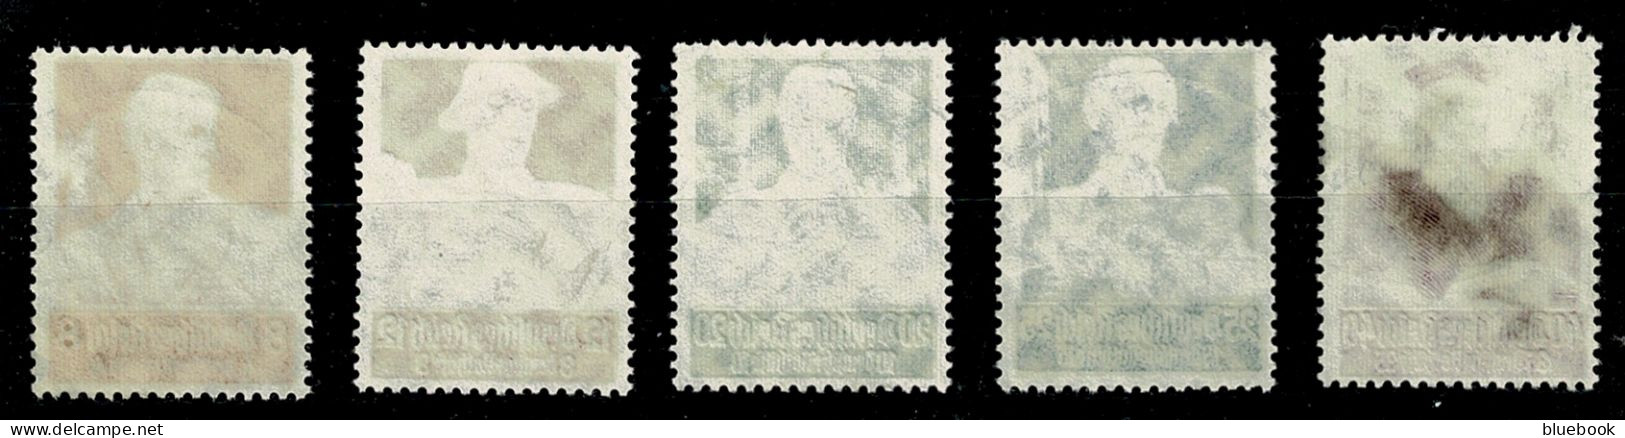 Ref 1646 - Germany 1934 Welfare Fund - 5 X Fine Used Stamps SG 555-559 - Usados